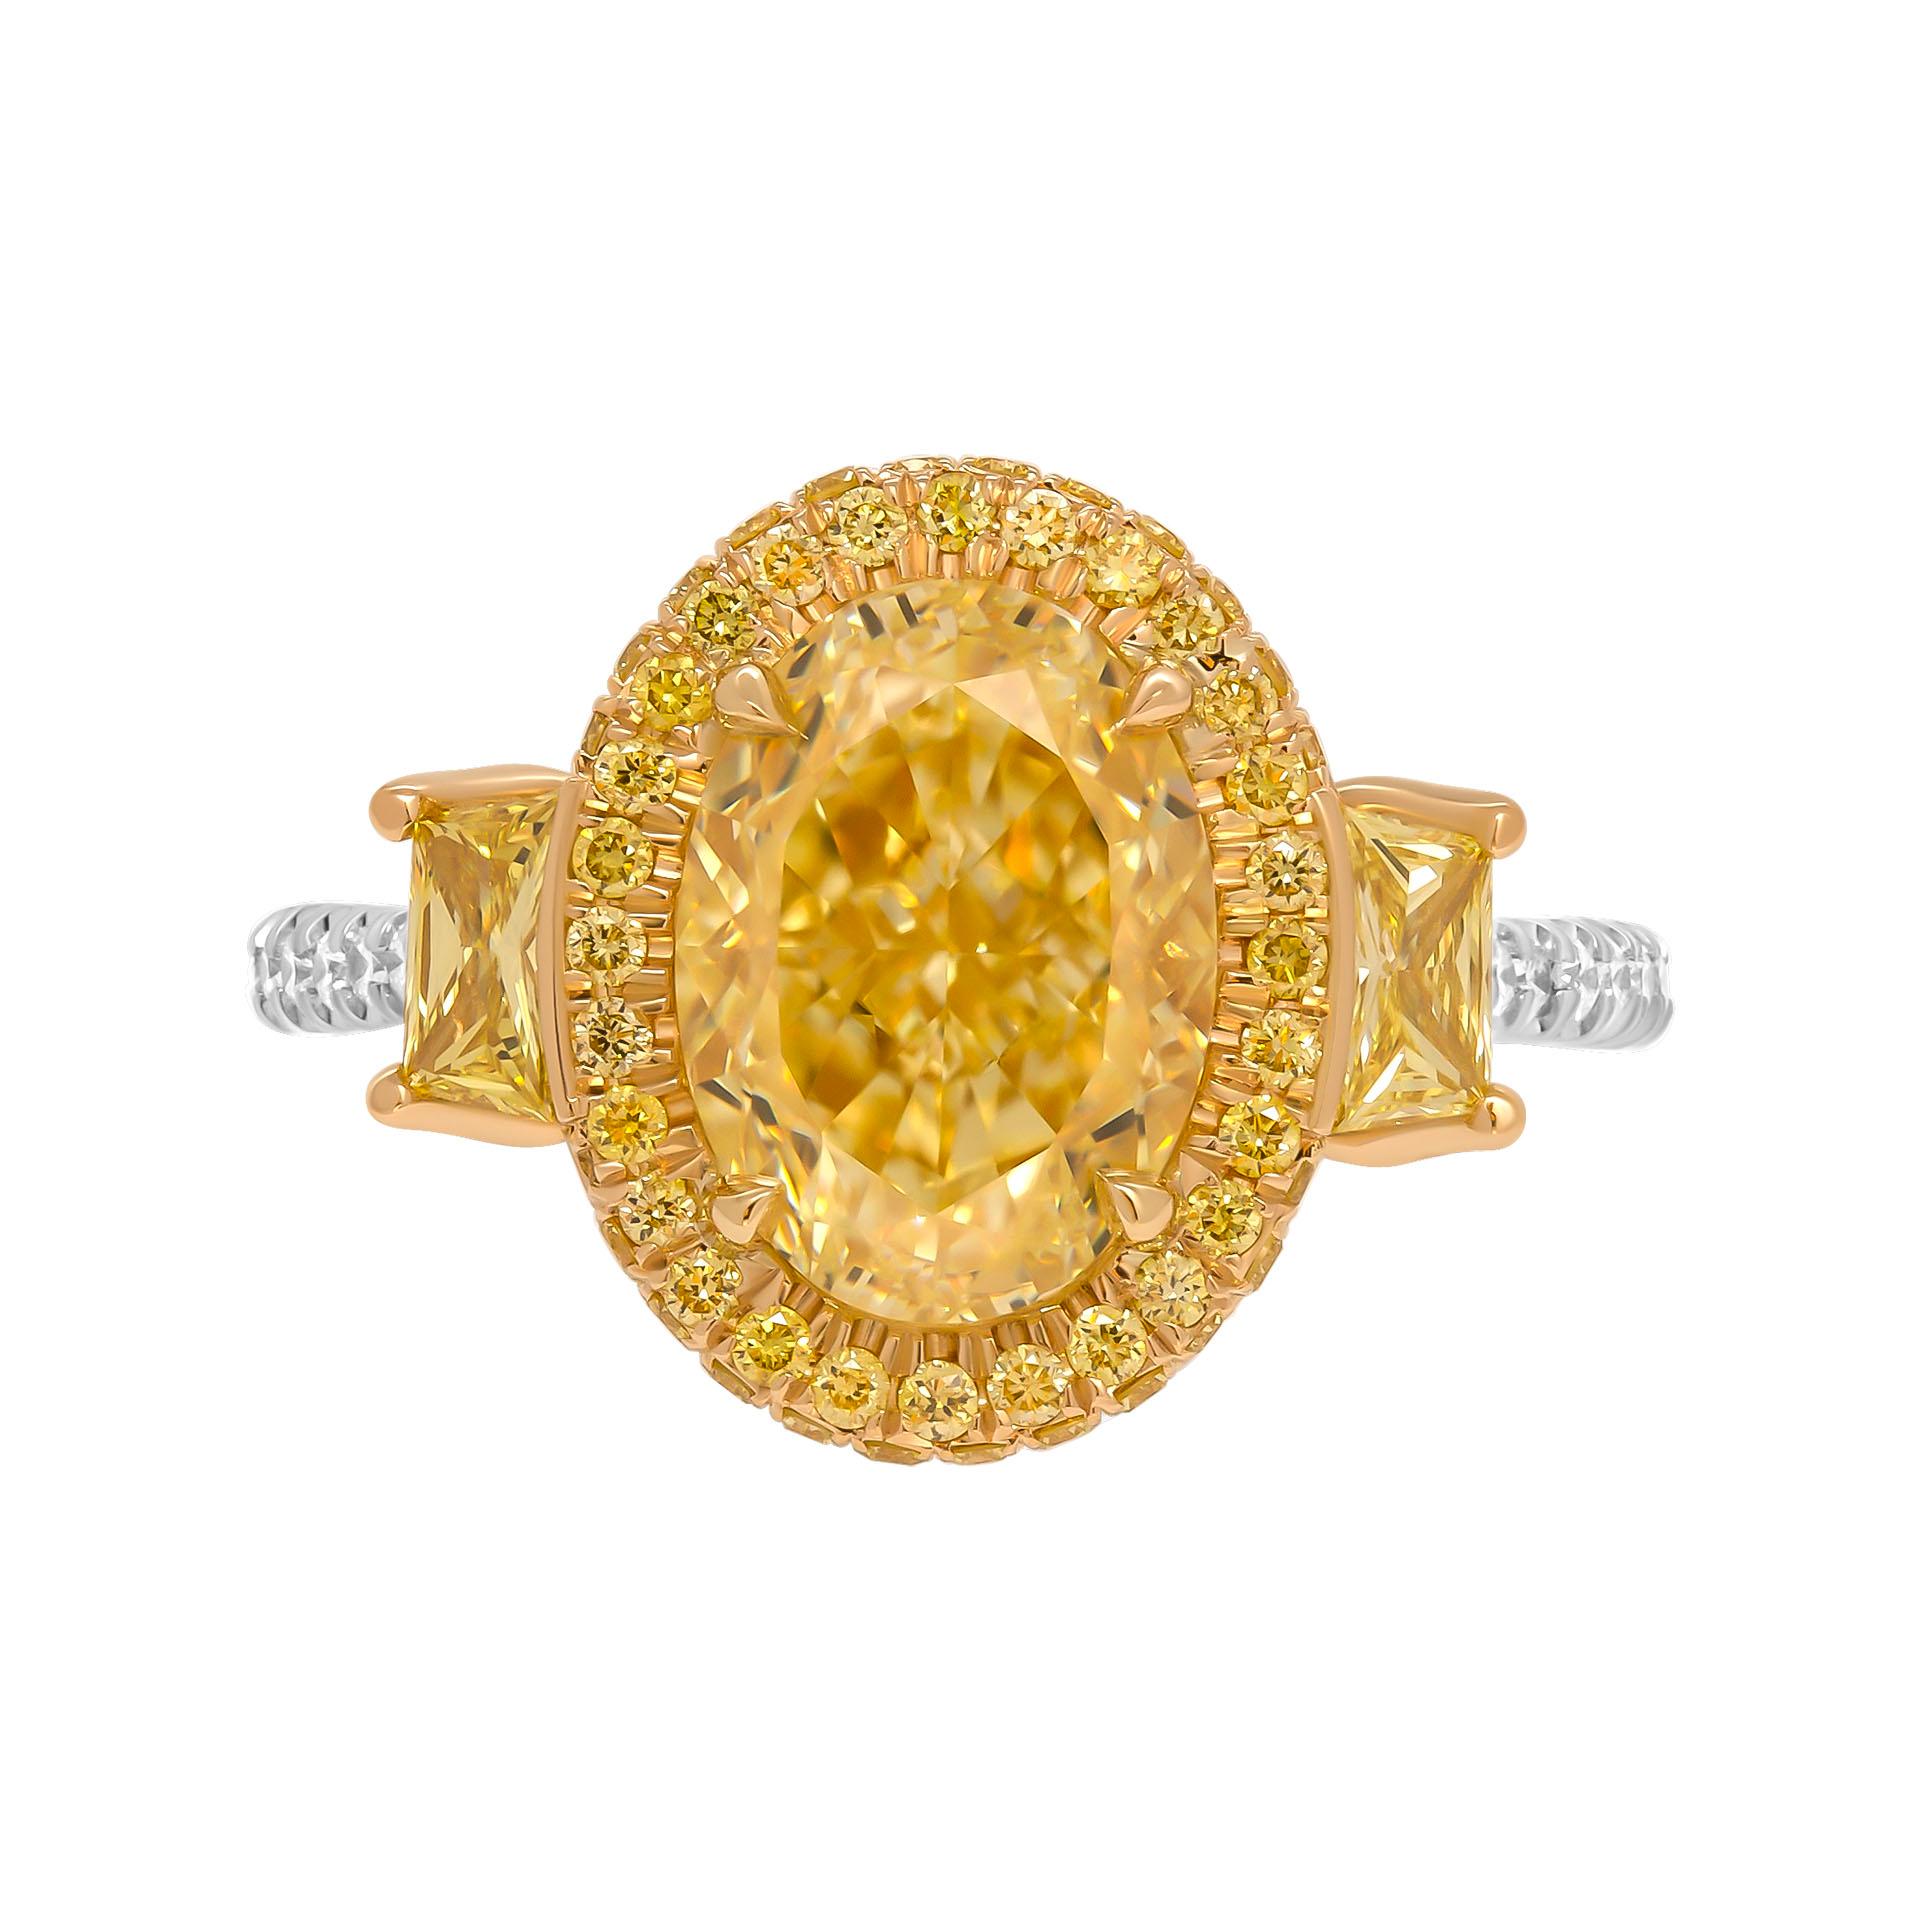 3 stone ring in Platinum & 18K Yellow Gold
Center: 3.33ct Natural Fancy Yellow VVS2 Oval Shape Diamond GIA#2446392453 

Two side trapezoids shapes diamond:
0.13ct Fancy Intense Yellow VS1 GIA#6224628782
0.13ct Fancy Intense Yellow VS1